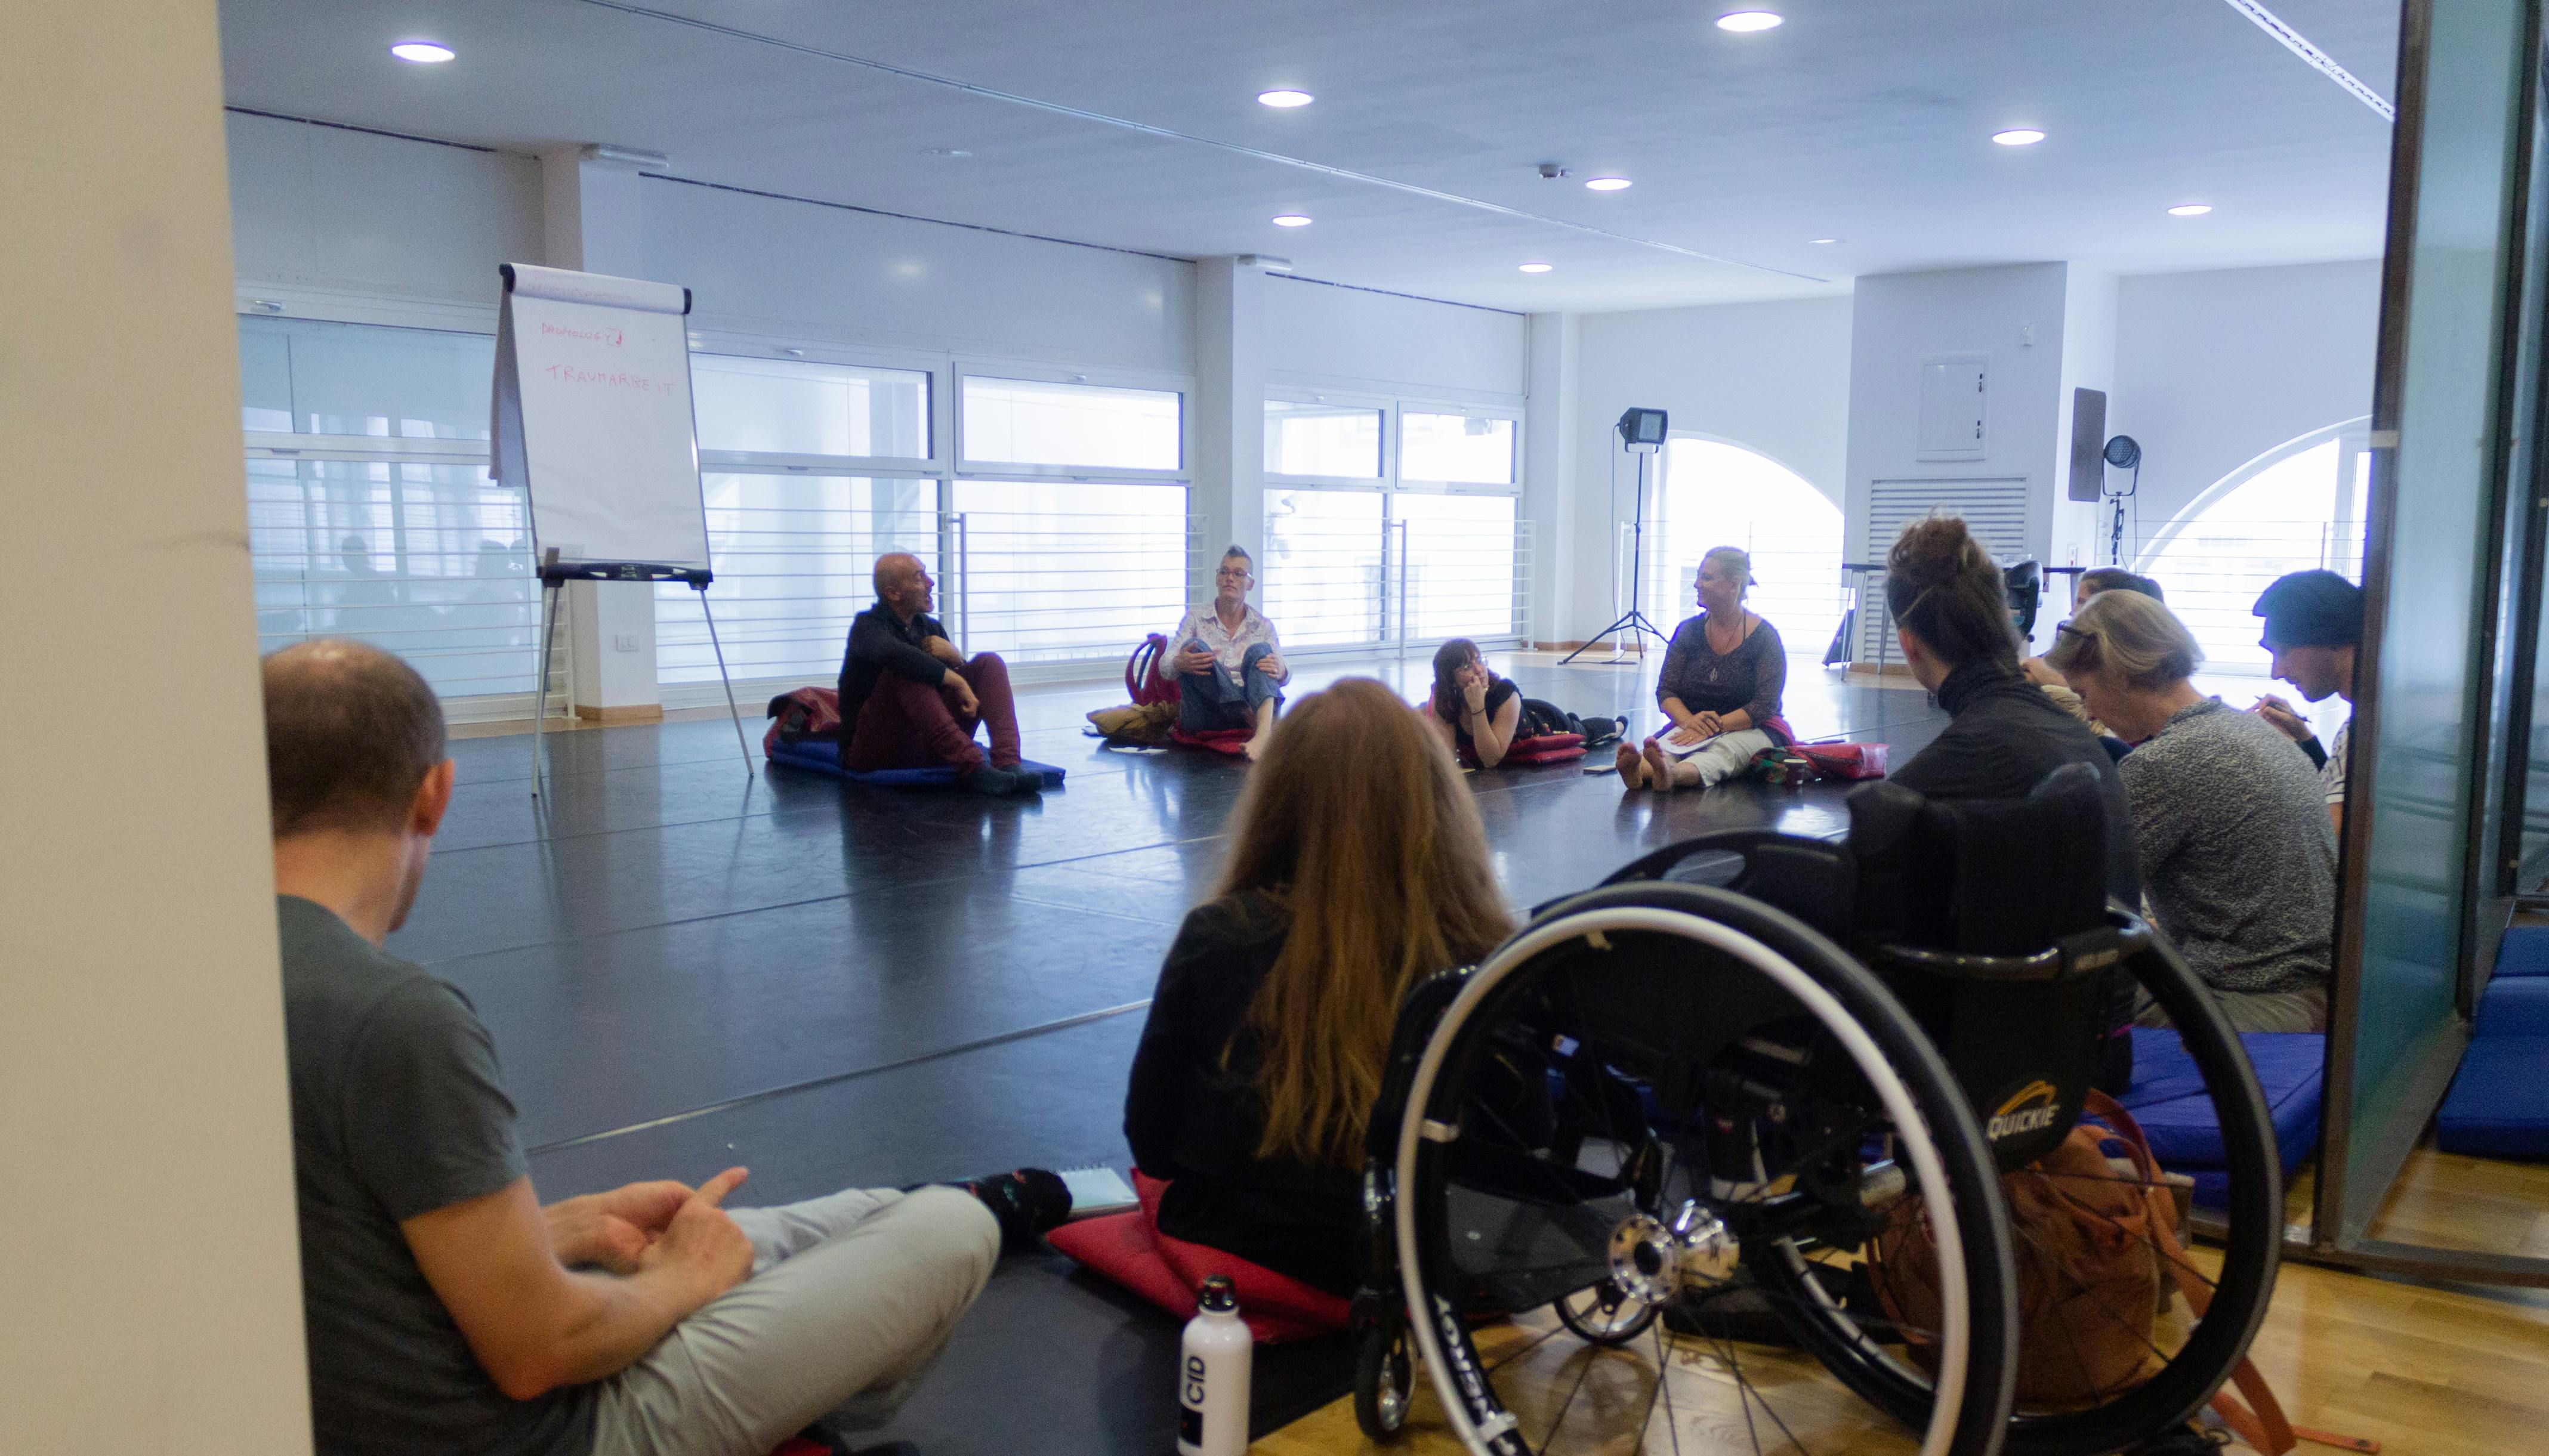 Dancers with and without disabilities during a workshop in the dance studios of Oriente Occidente Studio.